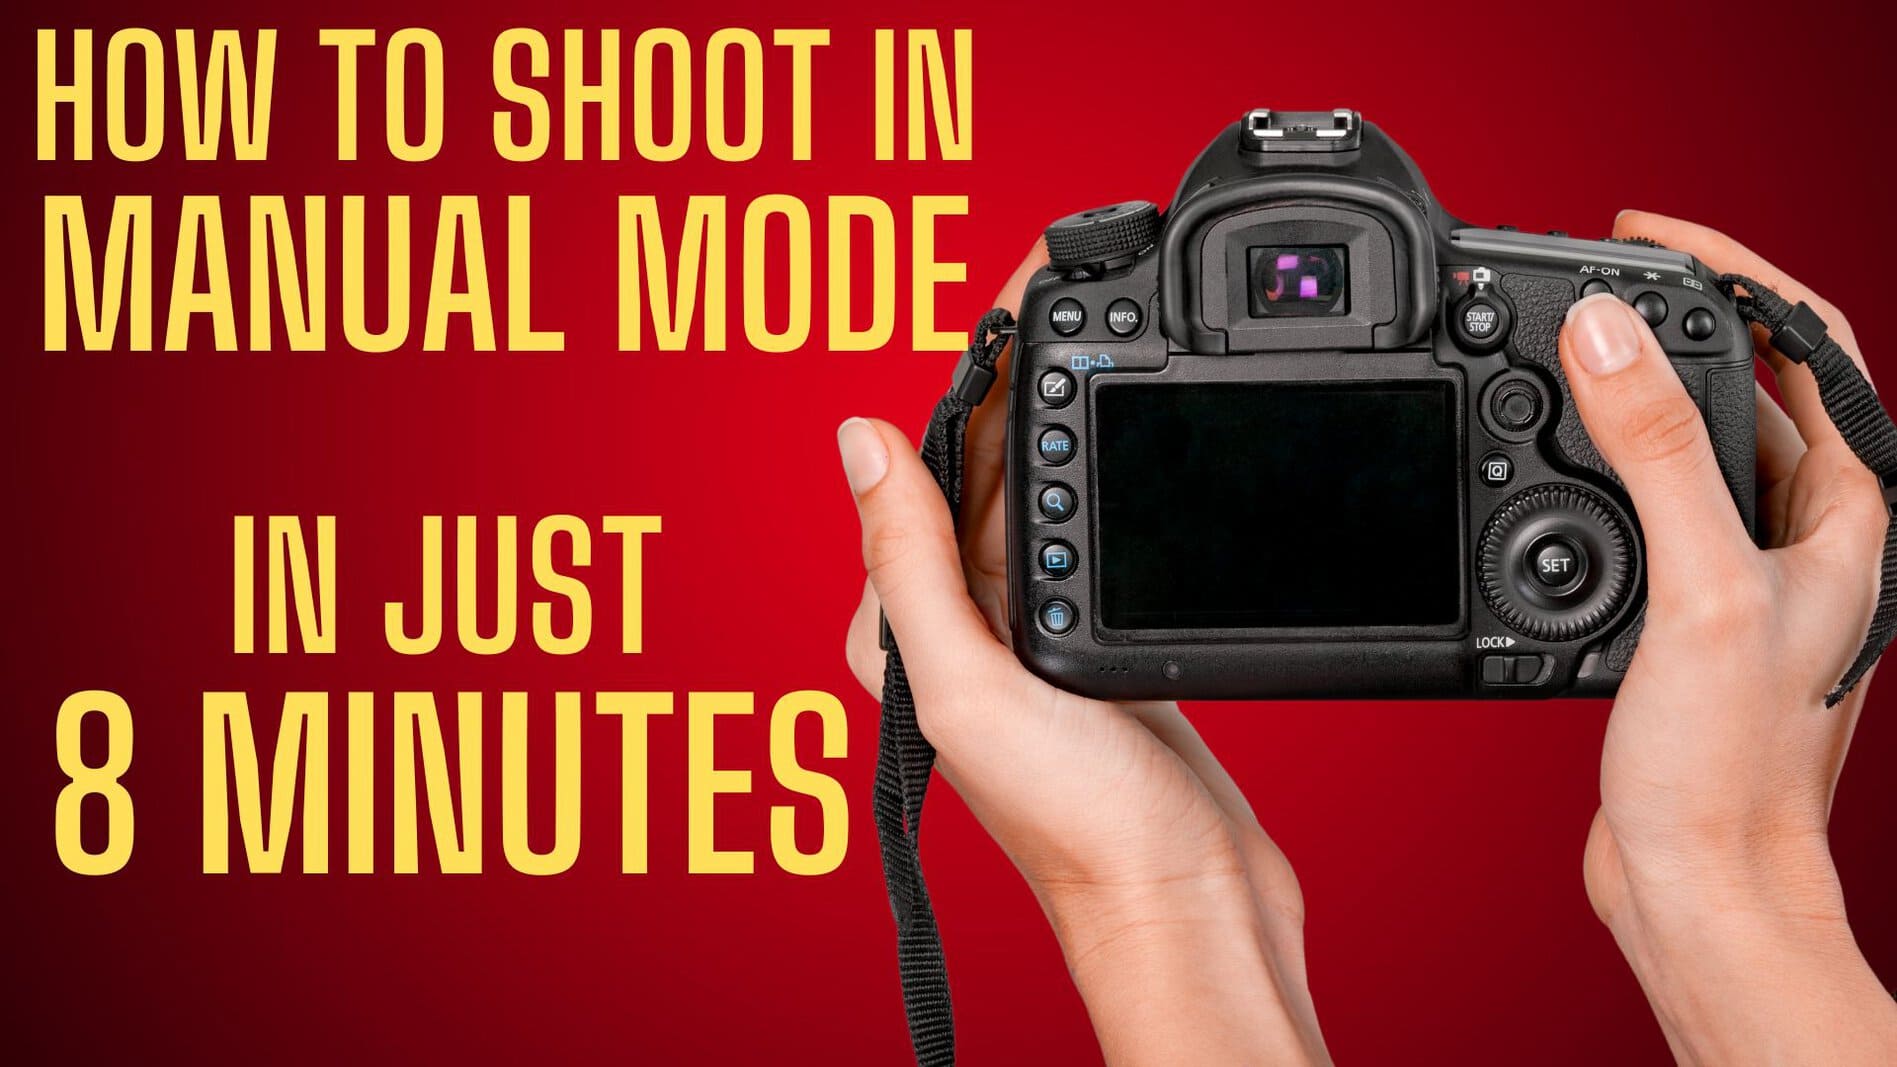 How to shoot in Manual Mode in just 8 minutes